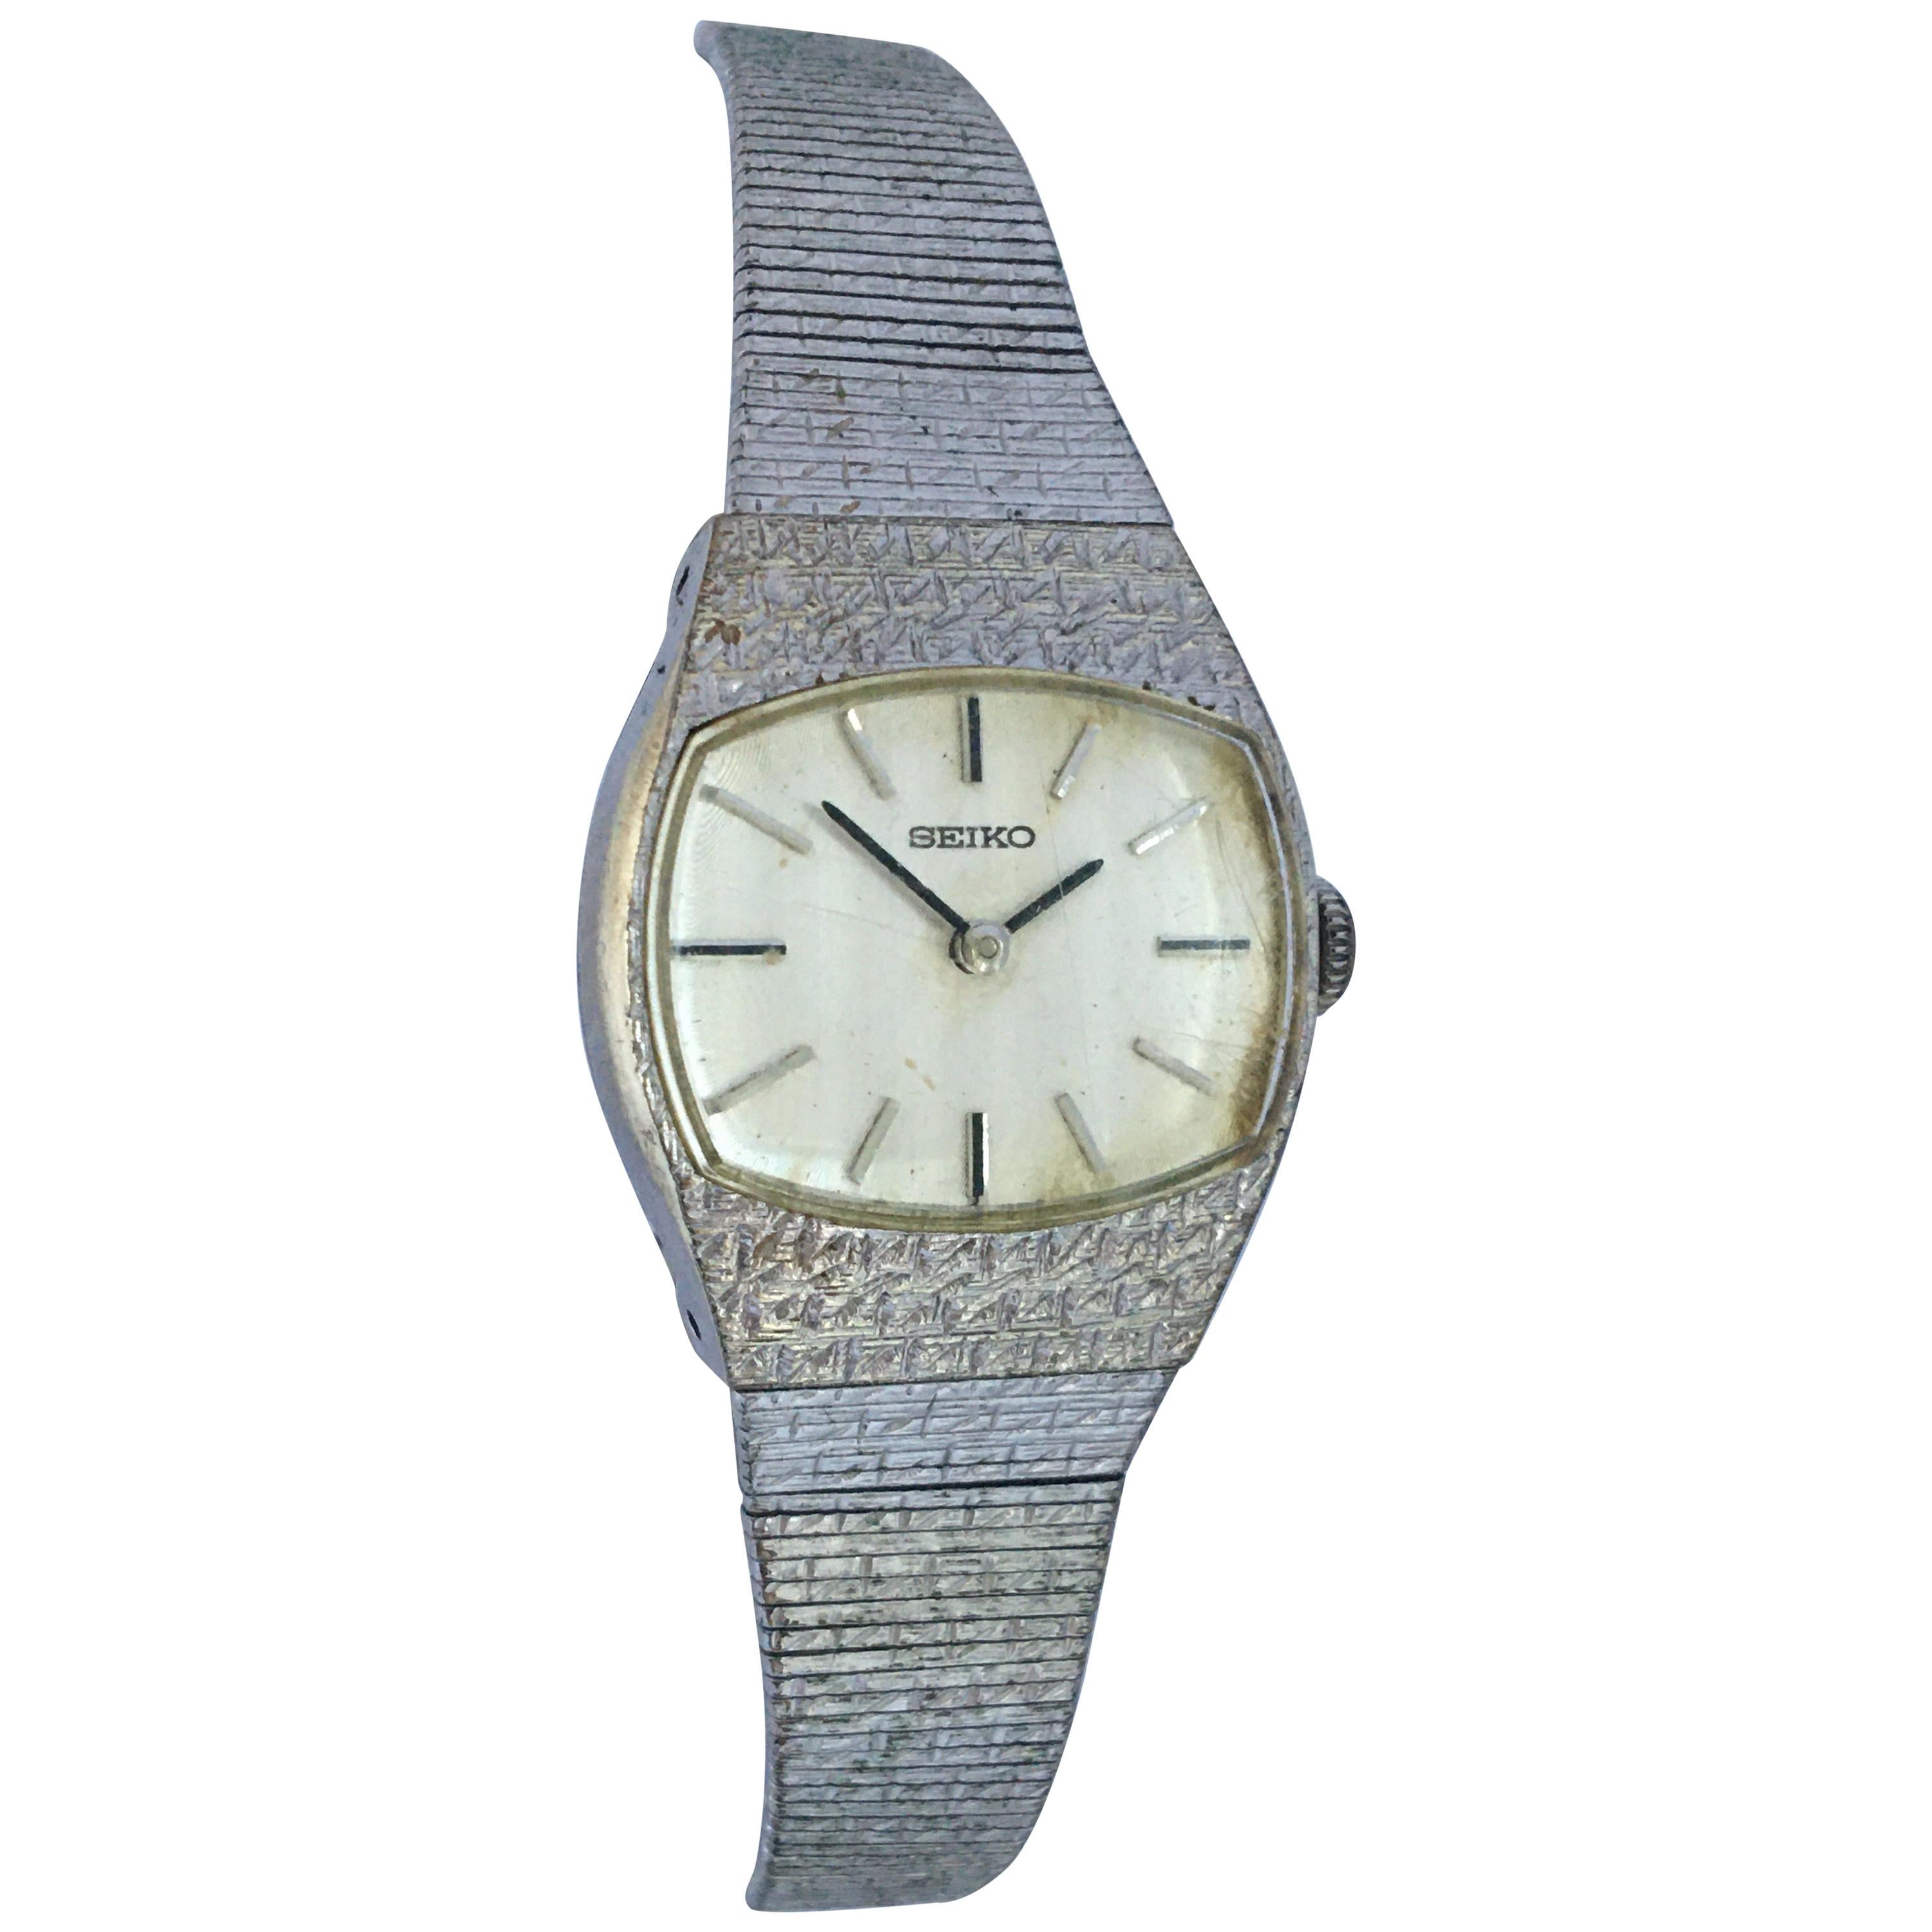 Vintage Seiko Watches - 5 For Sale on 1stDibs | 1970s seiko watches for  sale, 1980s seiko watches, vintage seiko for sale